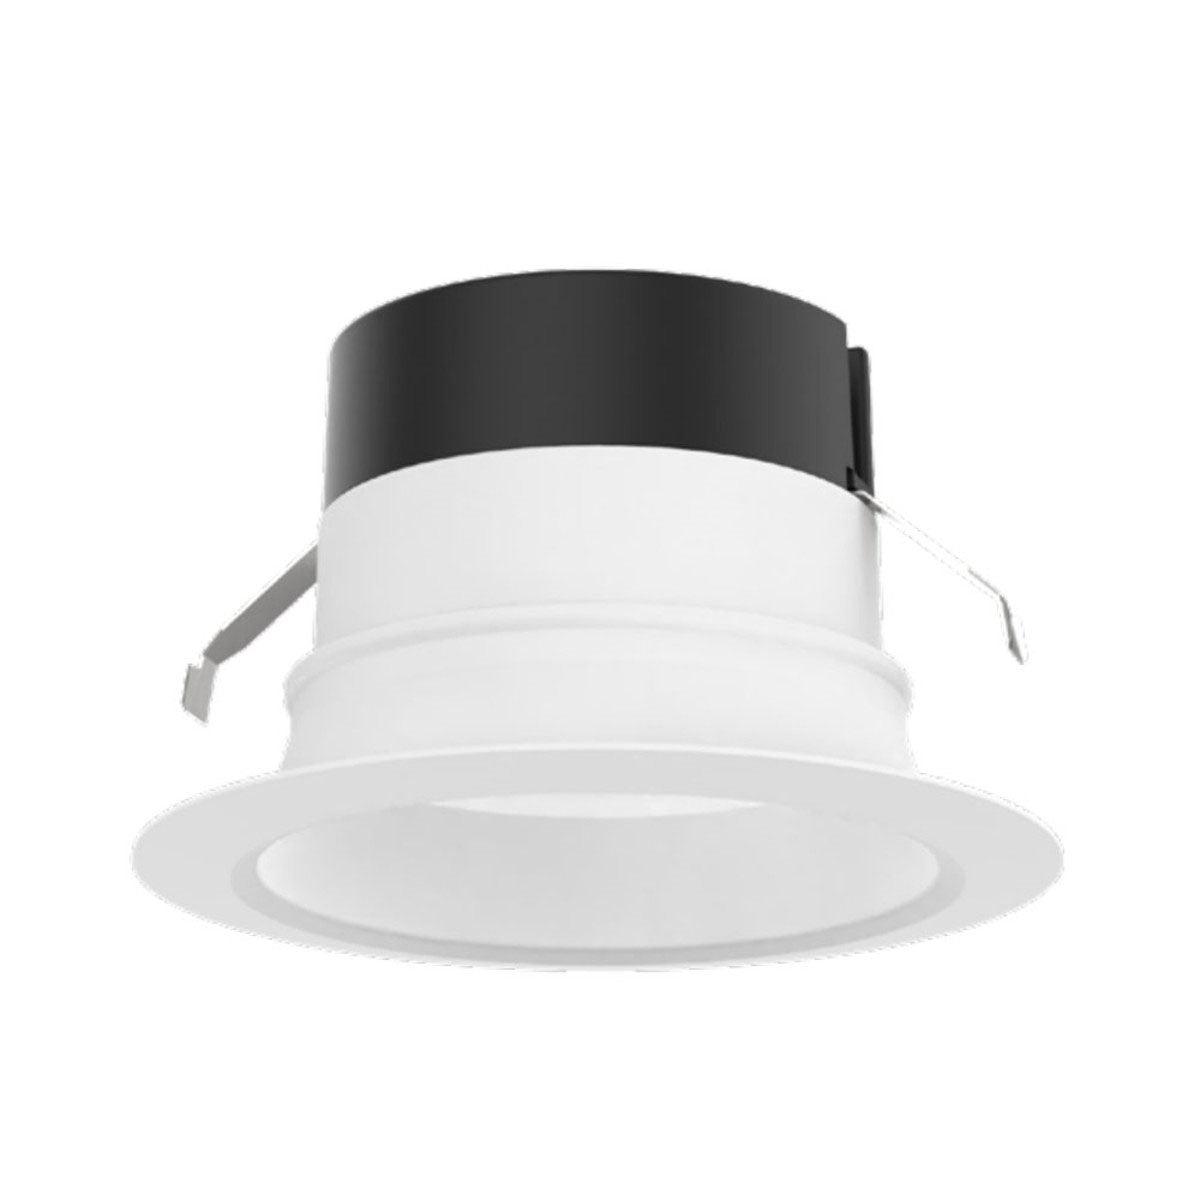 4 Inch Recessed LED Can Light, Round, 8 Watt, 700 Lumens, Selectable CCT, 2700K to 5000K, Smooth Trim - Bees Lighting